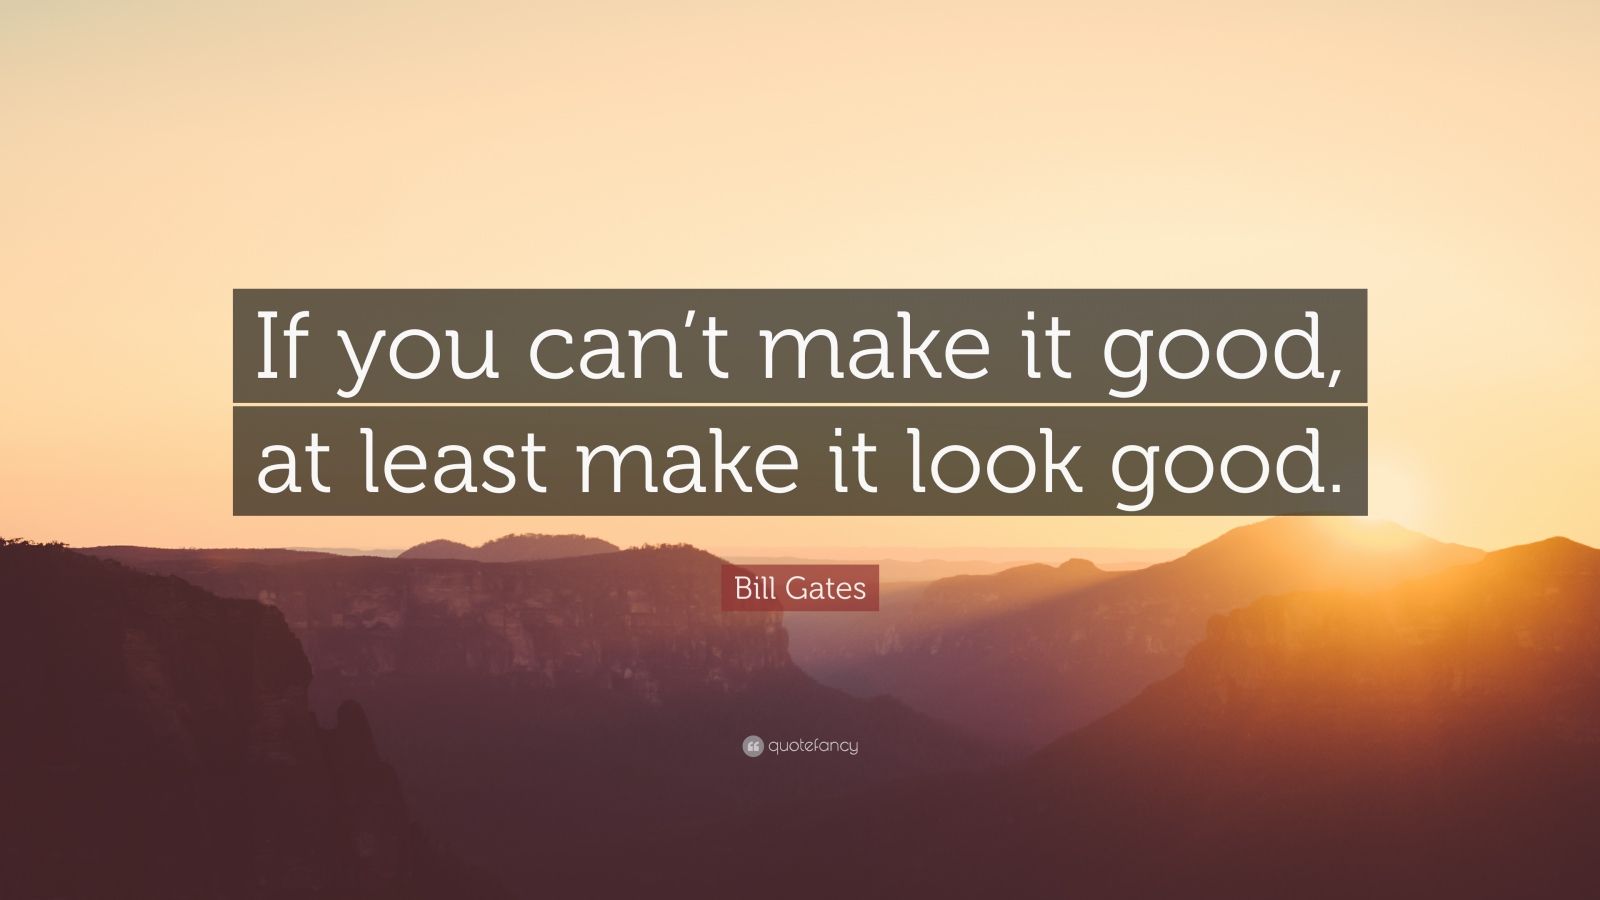 Bill Gates Quote: “If you can’t make it good, at least make it look